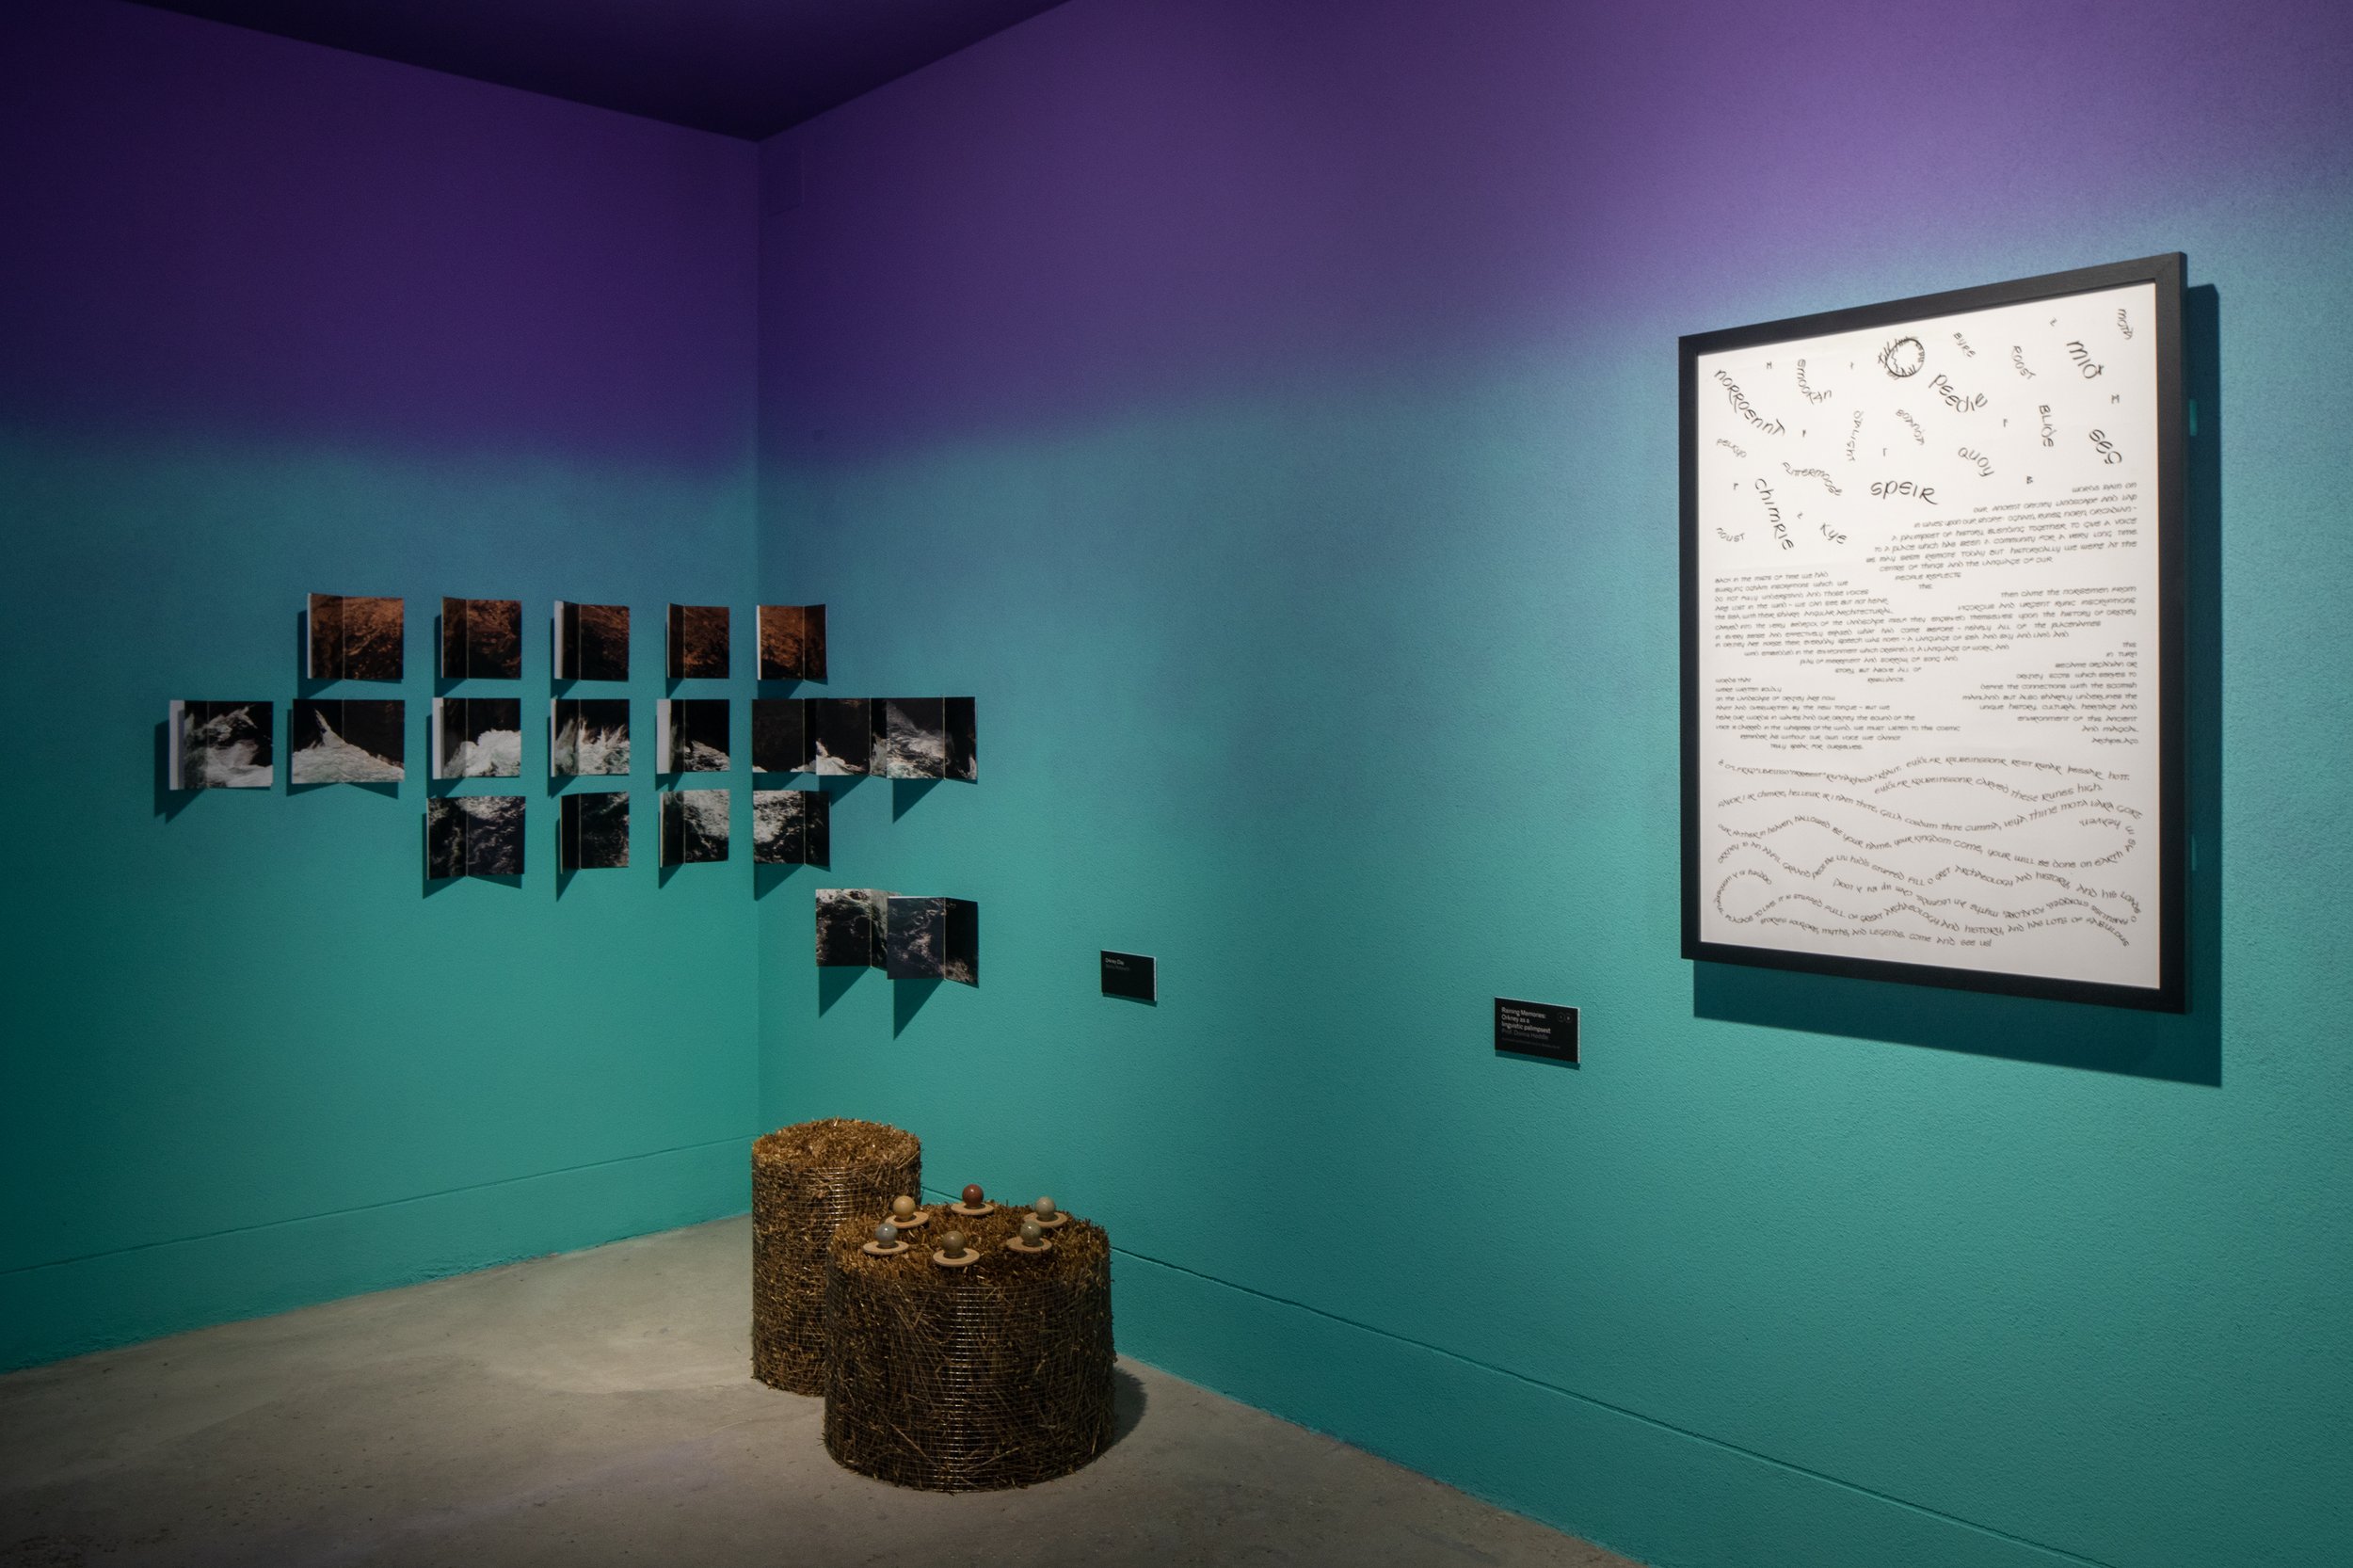 A Fragile Correspondence -Work on display in Orkney section - photo by Daniele Sambo.jpg